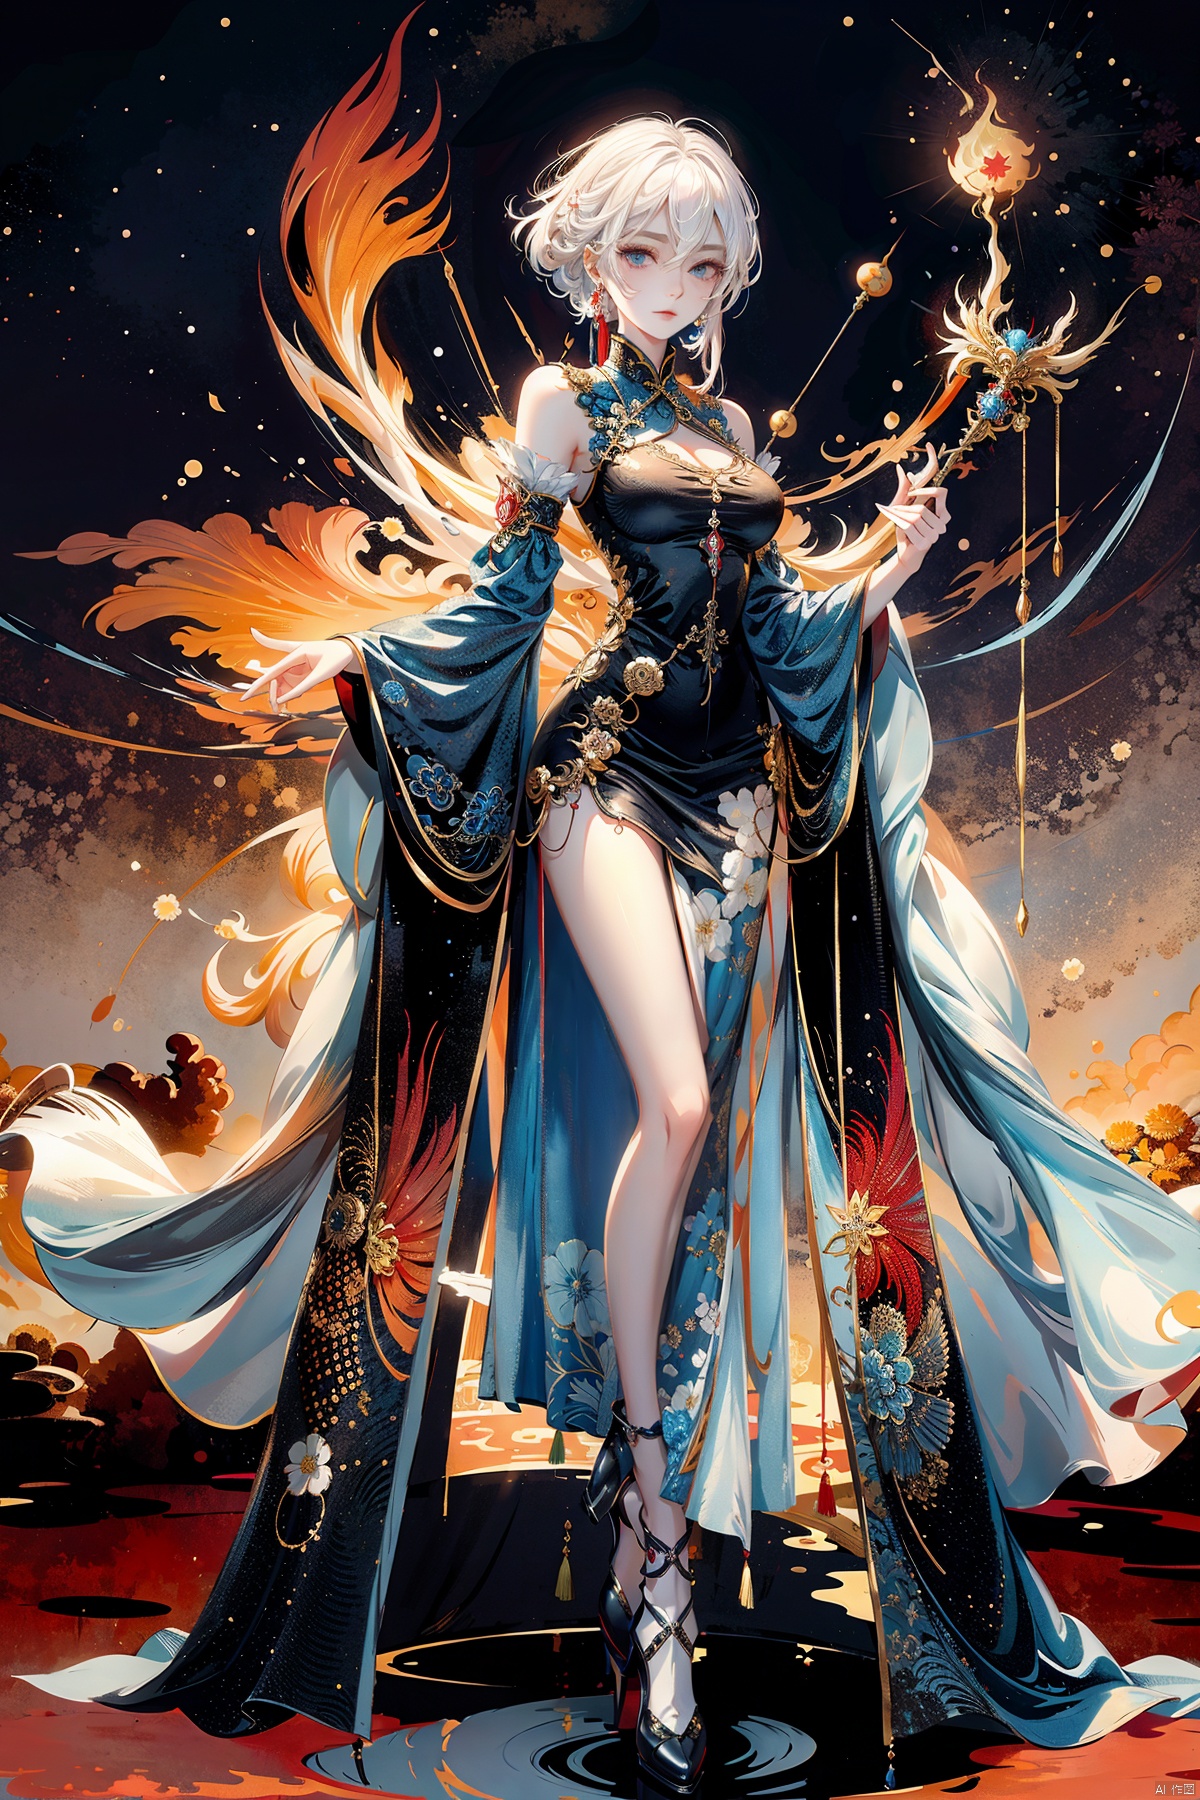 A demon with white hair, blue eyes resembling blue gemstones, and a fringed haircut. This demon exudes an outgoing and sunny personality. She is dressed in a peculiar, mechanical construct cheongsam gown, predominantly made of gossamer material, with accents that evoke the ambiance of fire element. The cheongsam gown itself is in vibrant Chinese red. Completing her ensemble, she wears a pair of high-heeled shoes.
